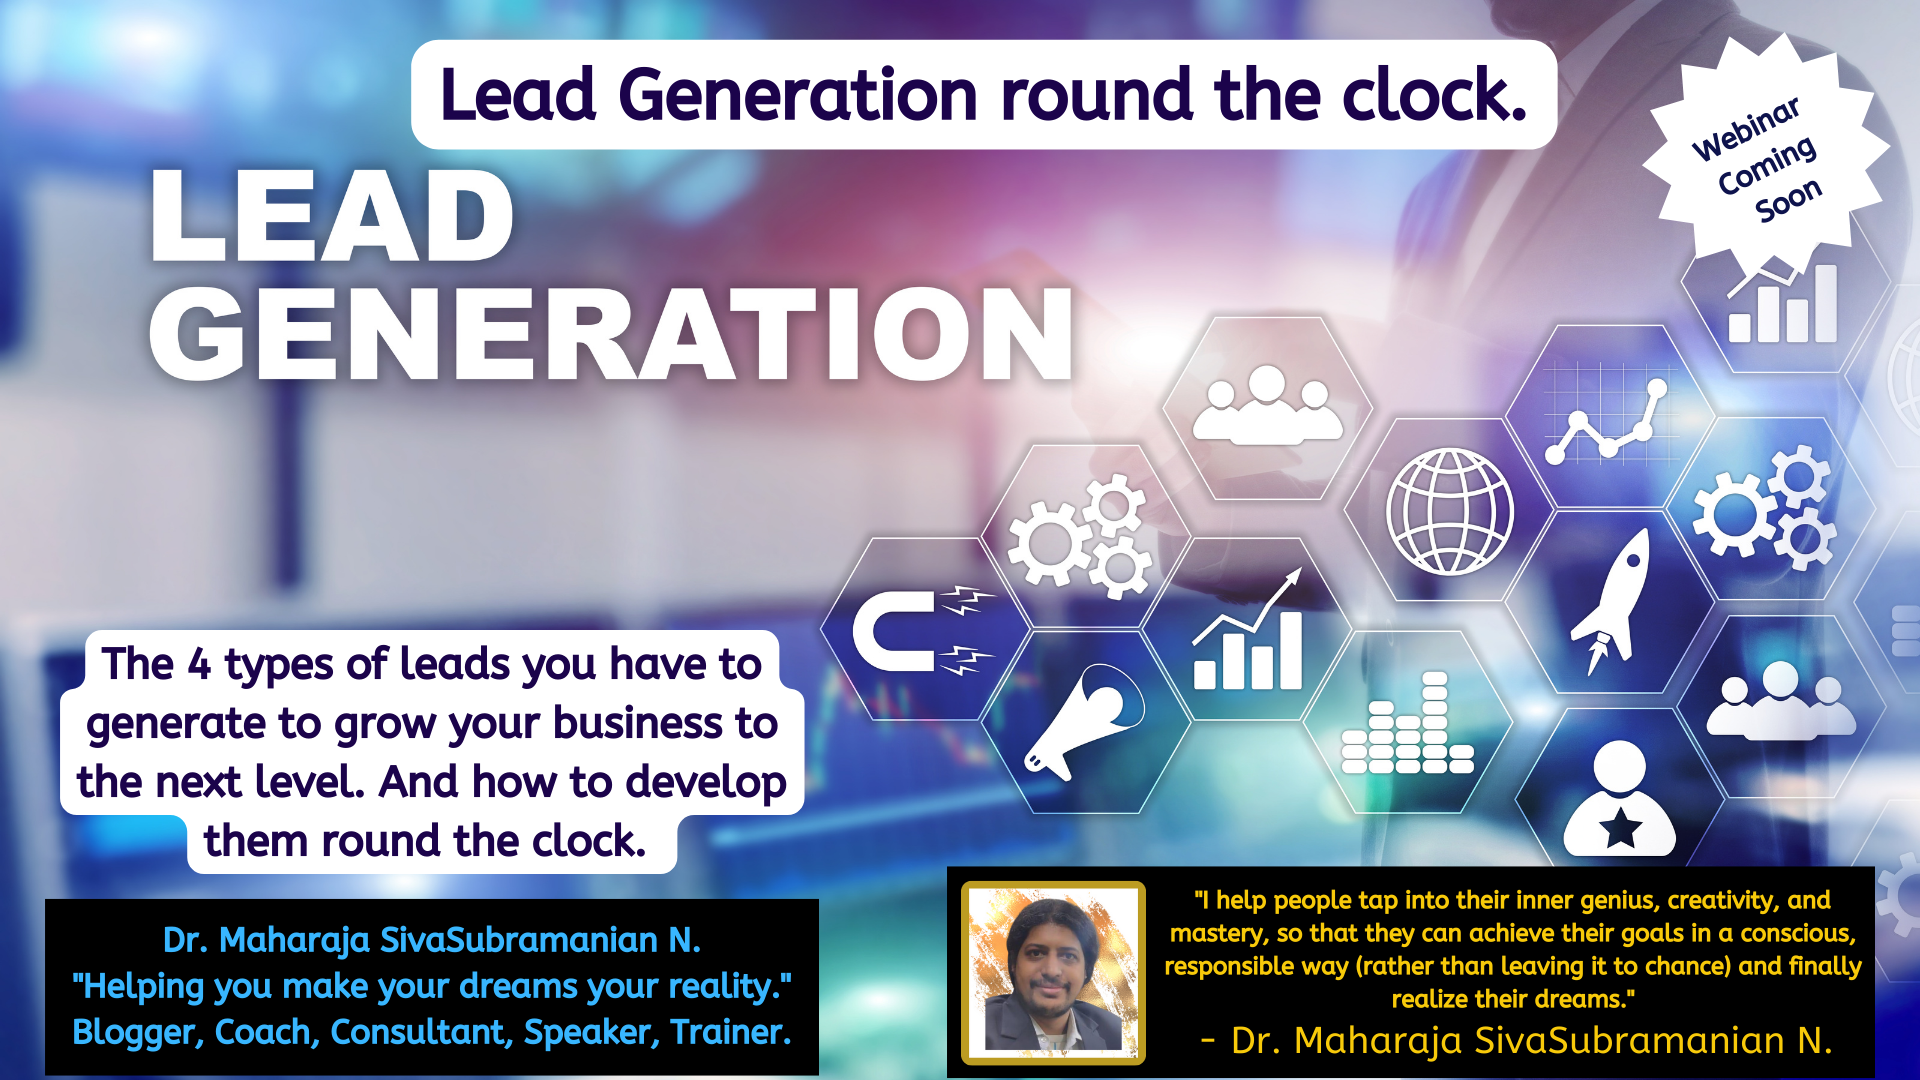 Lead Generation round the clock for Management Consultants. – Upcoming free webinar.